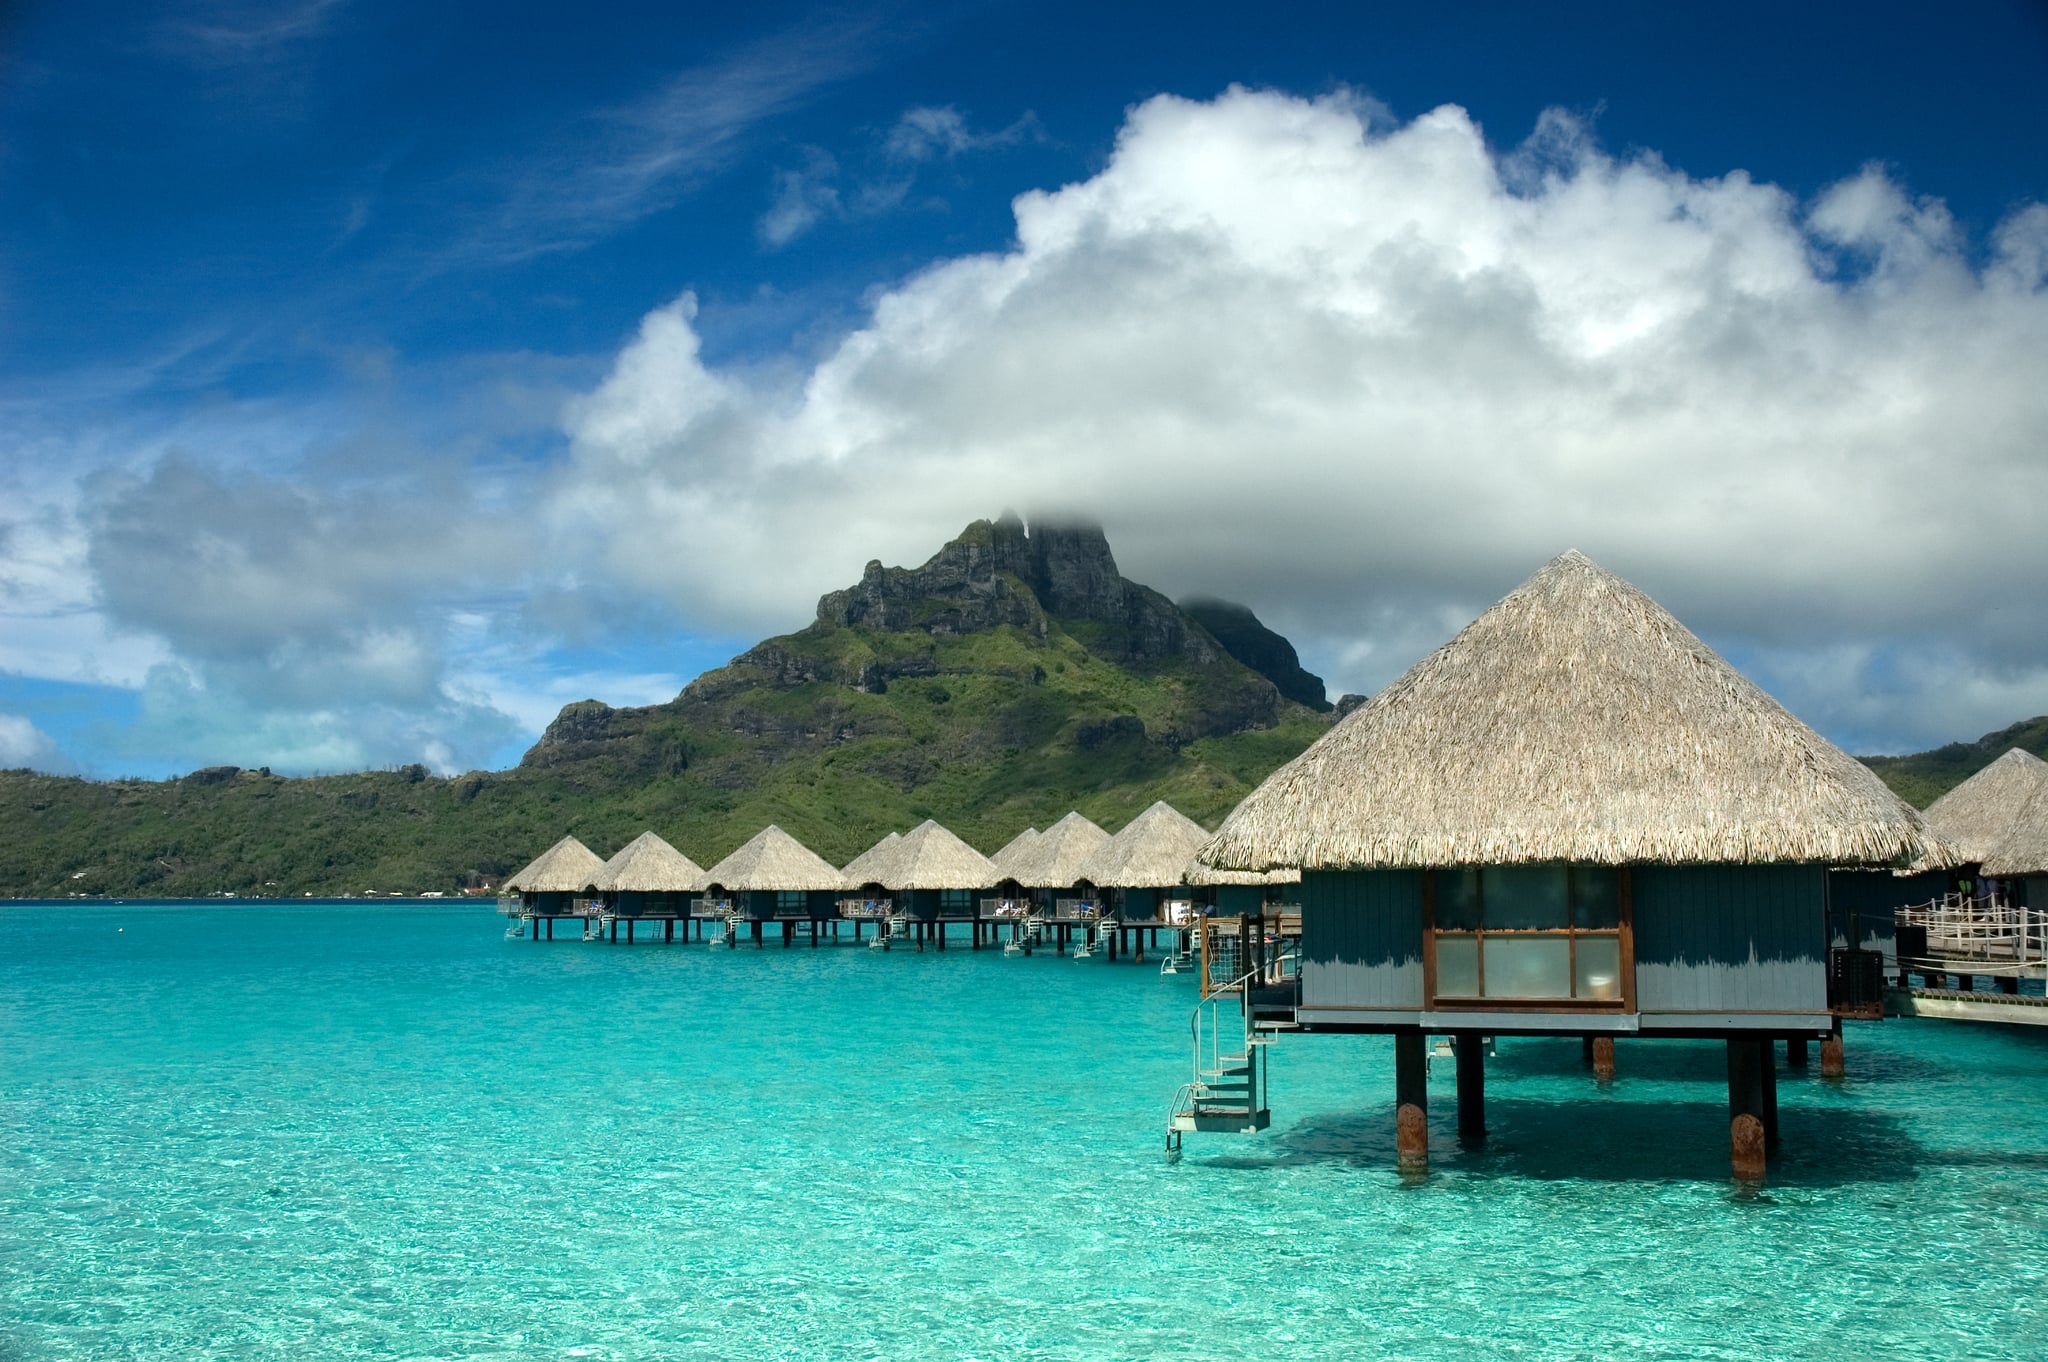 Stay in an Overwater Bungalow in Bora Bora | 83 Travel Experiences to ...